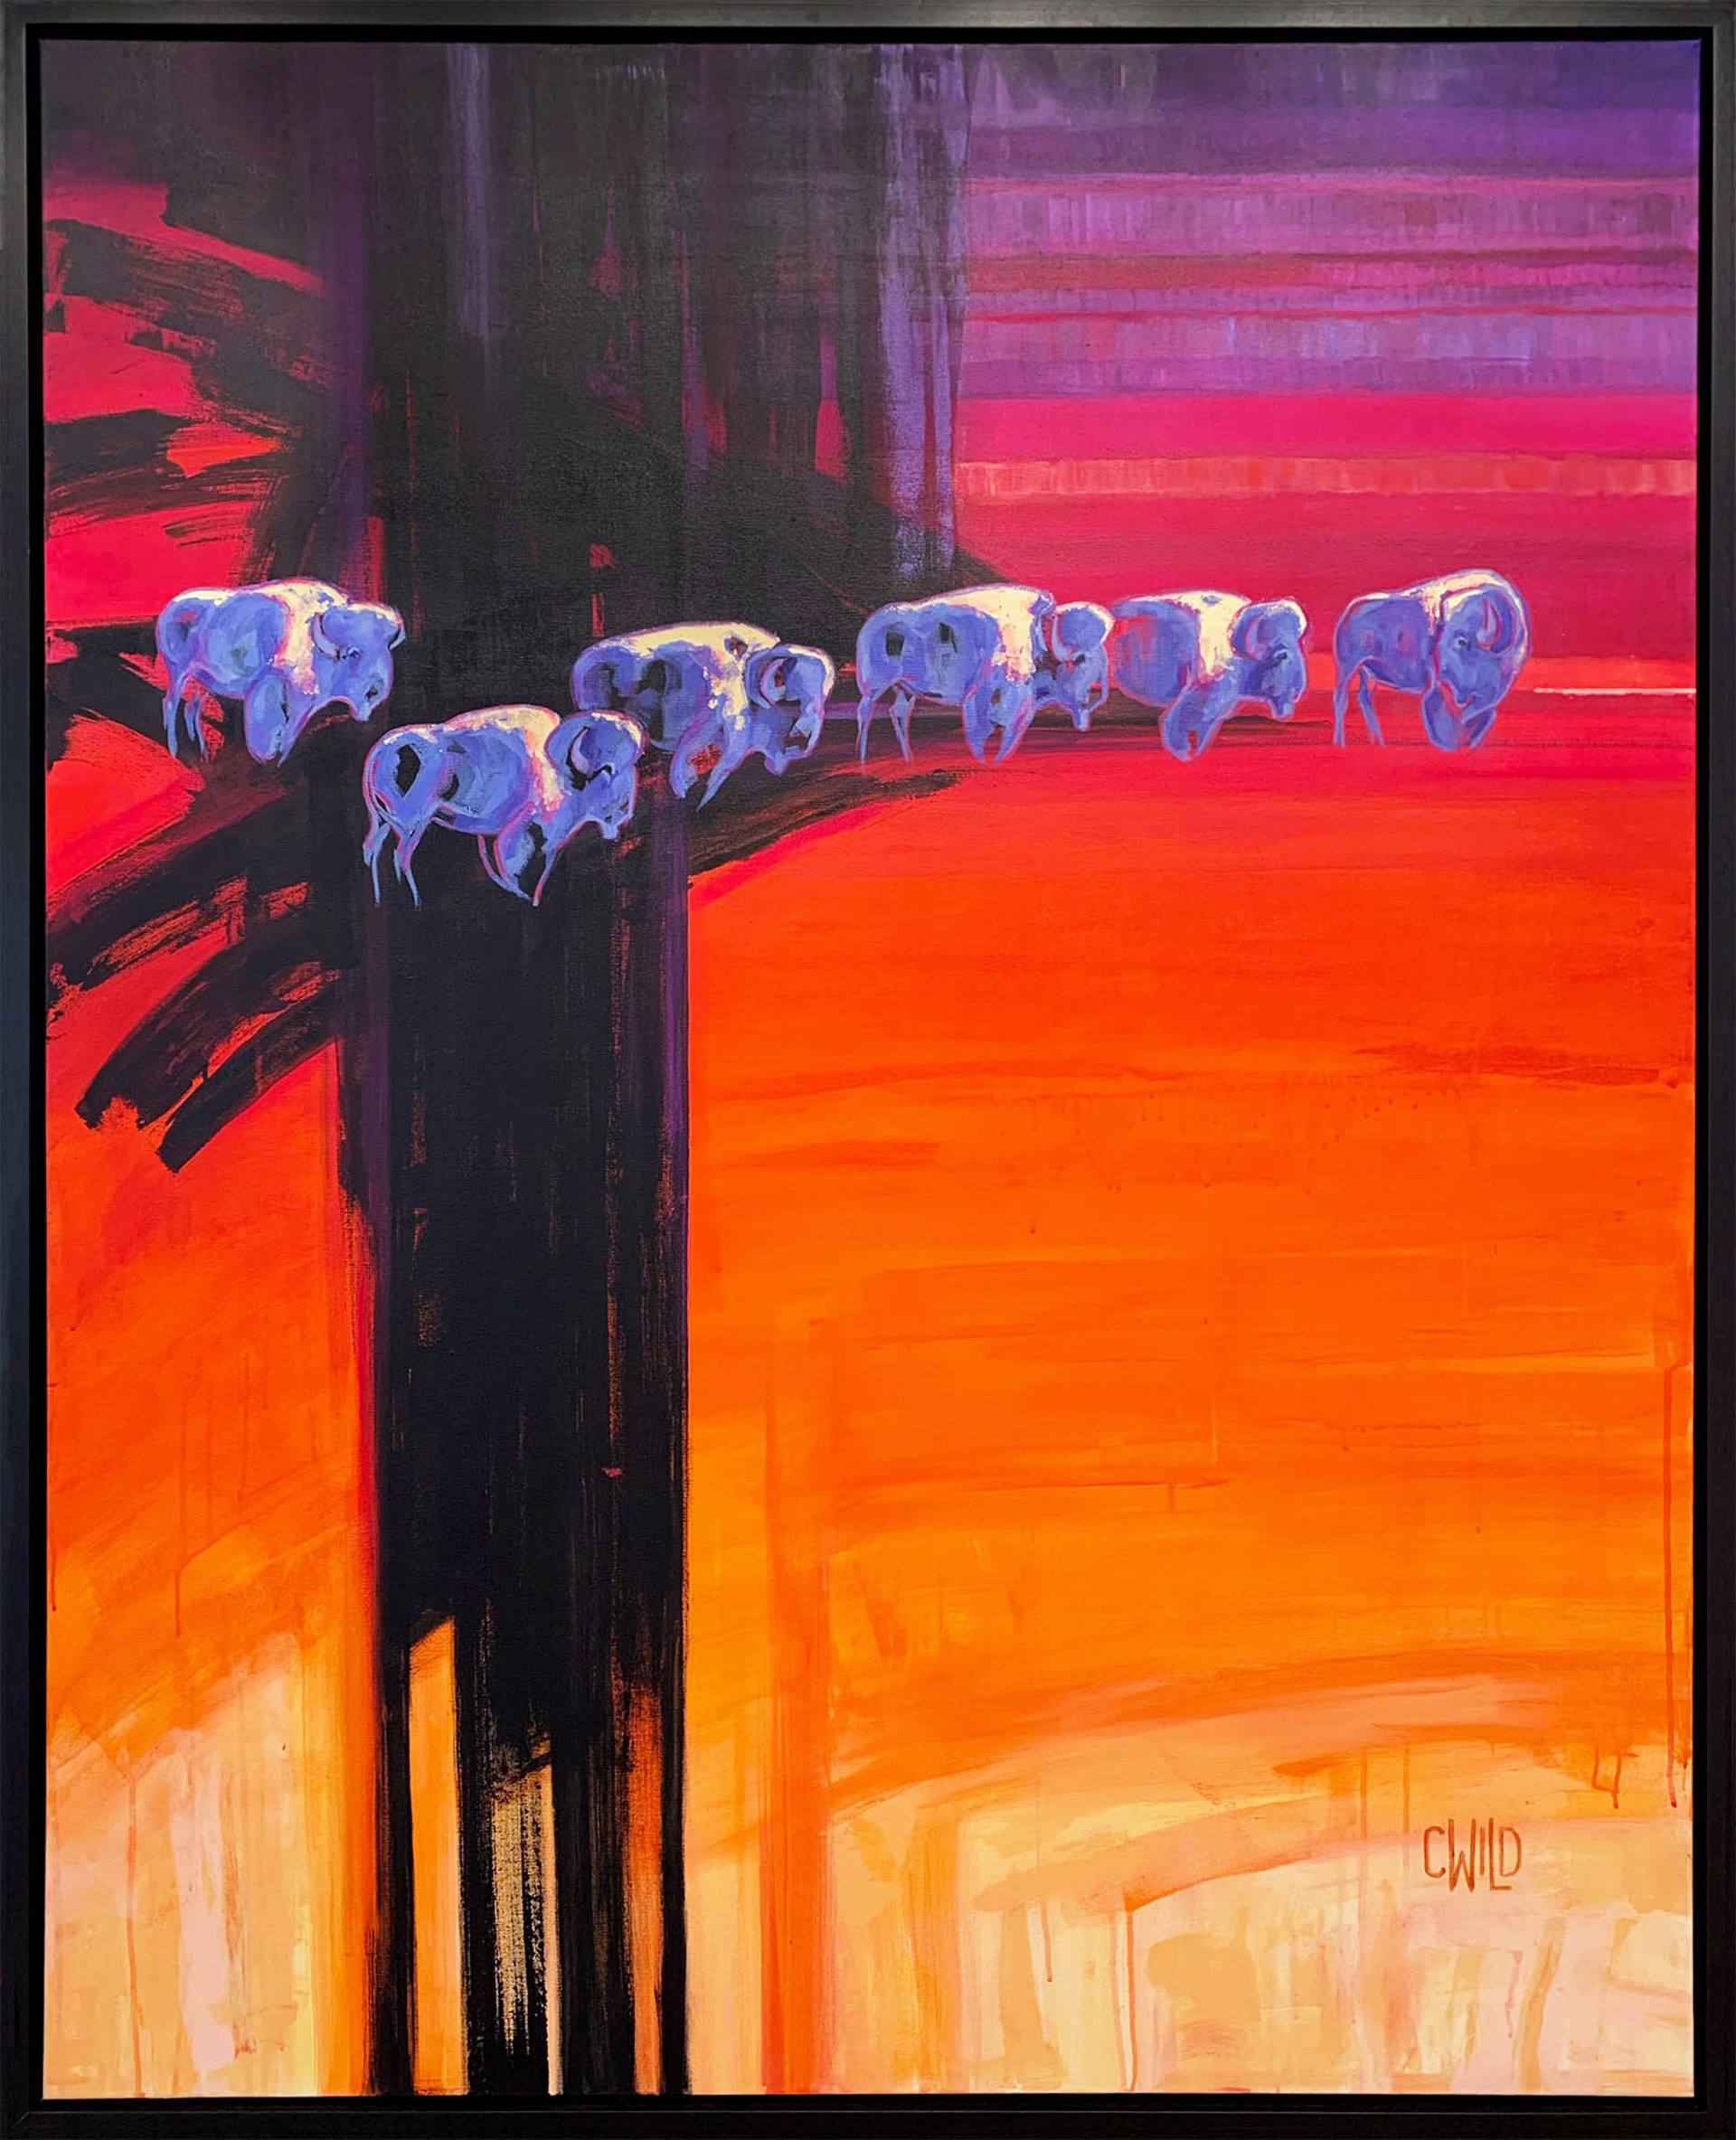 A Contemporary Orange And Purple Painting Of Bison By Carrie Wild